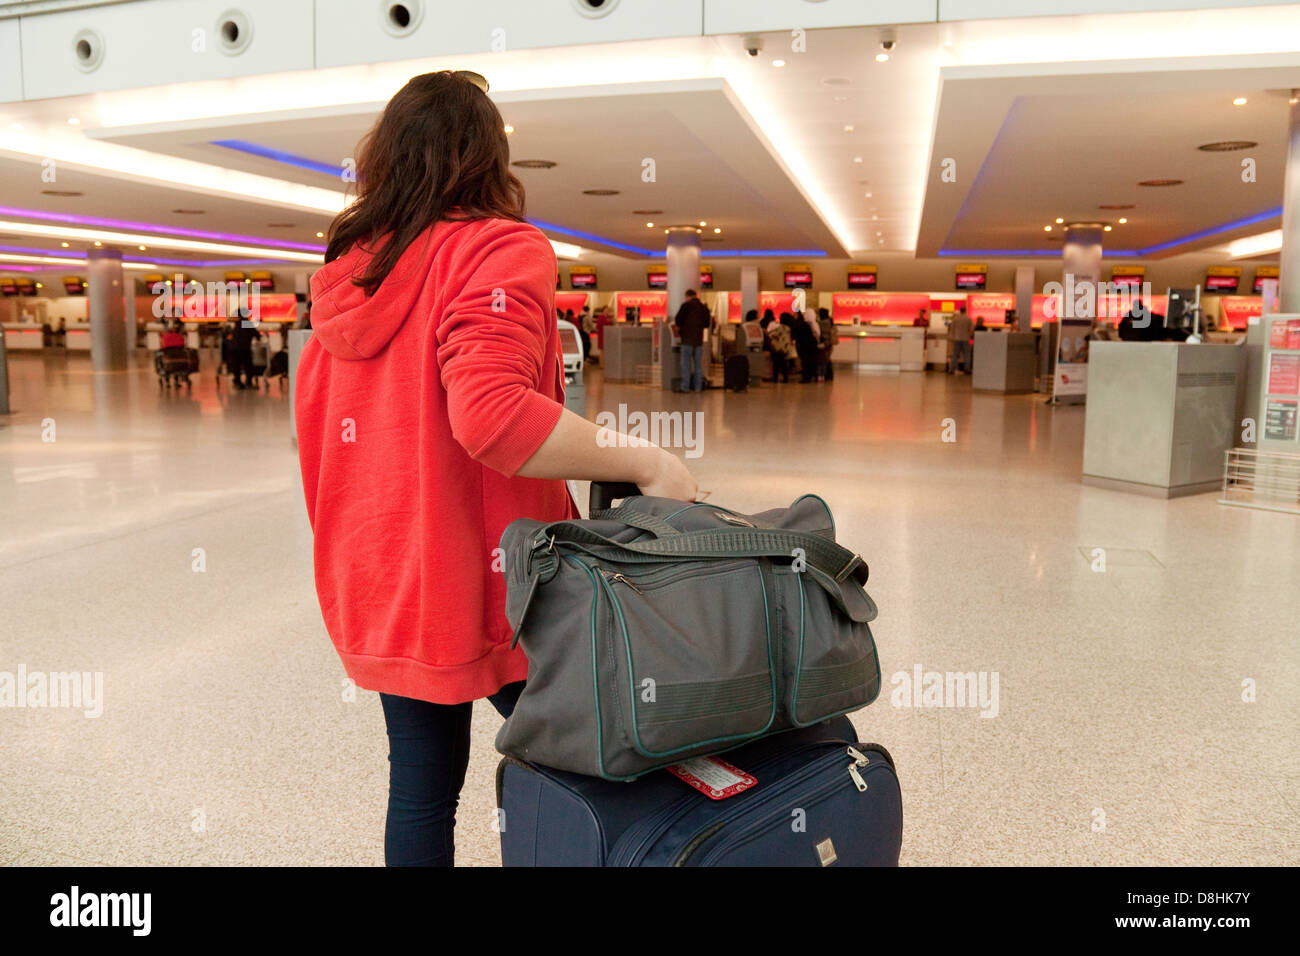 Young woman at airport check in with baggage, Terminal 3, Heathrow airport UK Stock Photo